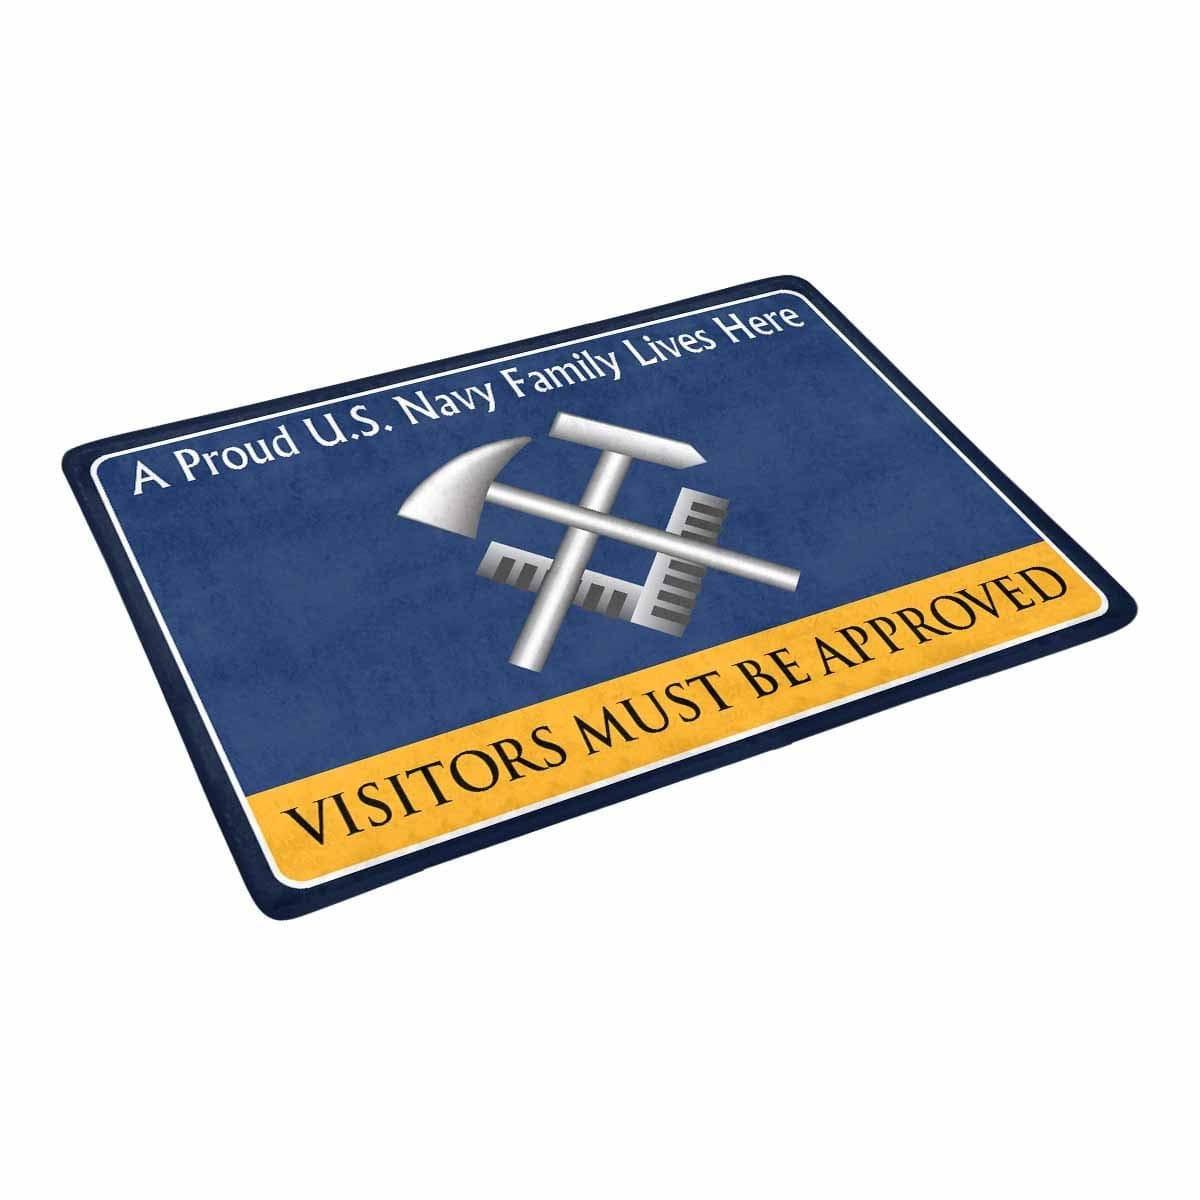 Navy Hull Maintenance Technician Navy HT Family Doormat - Visitors must be approved (23,6 inches x 15,7 inches)-Doormat-Navy-Rate-Veterans Nation